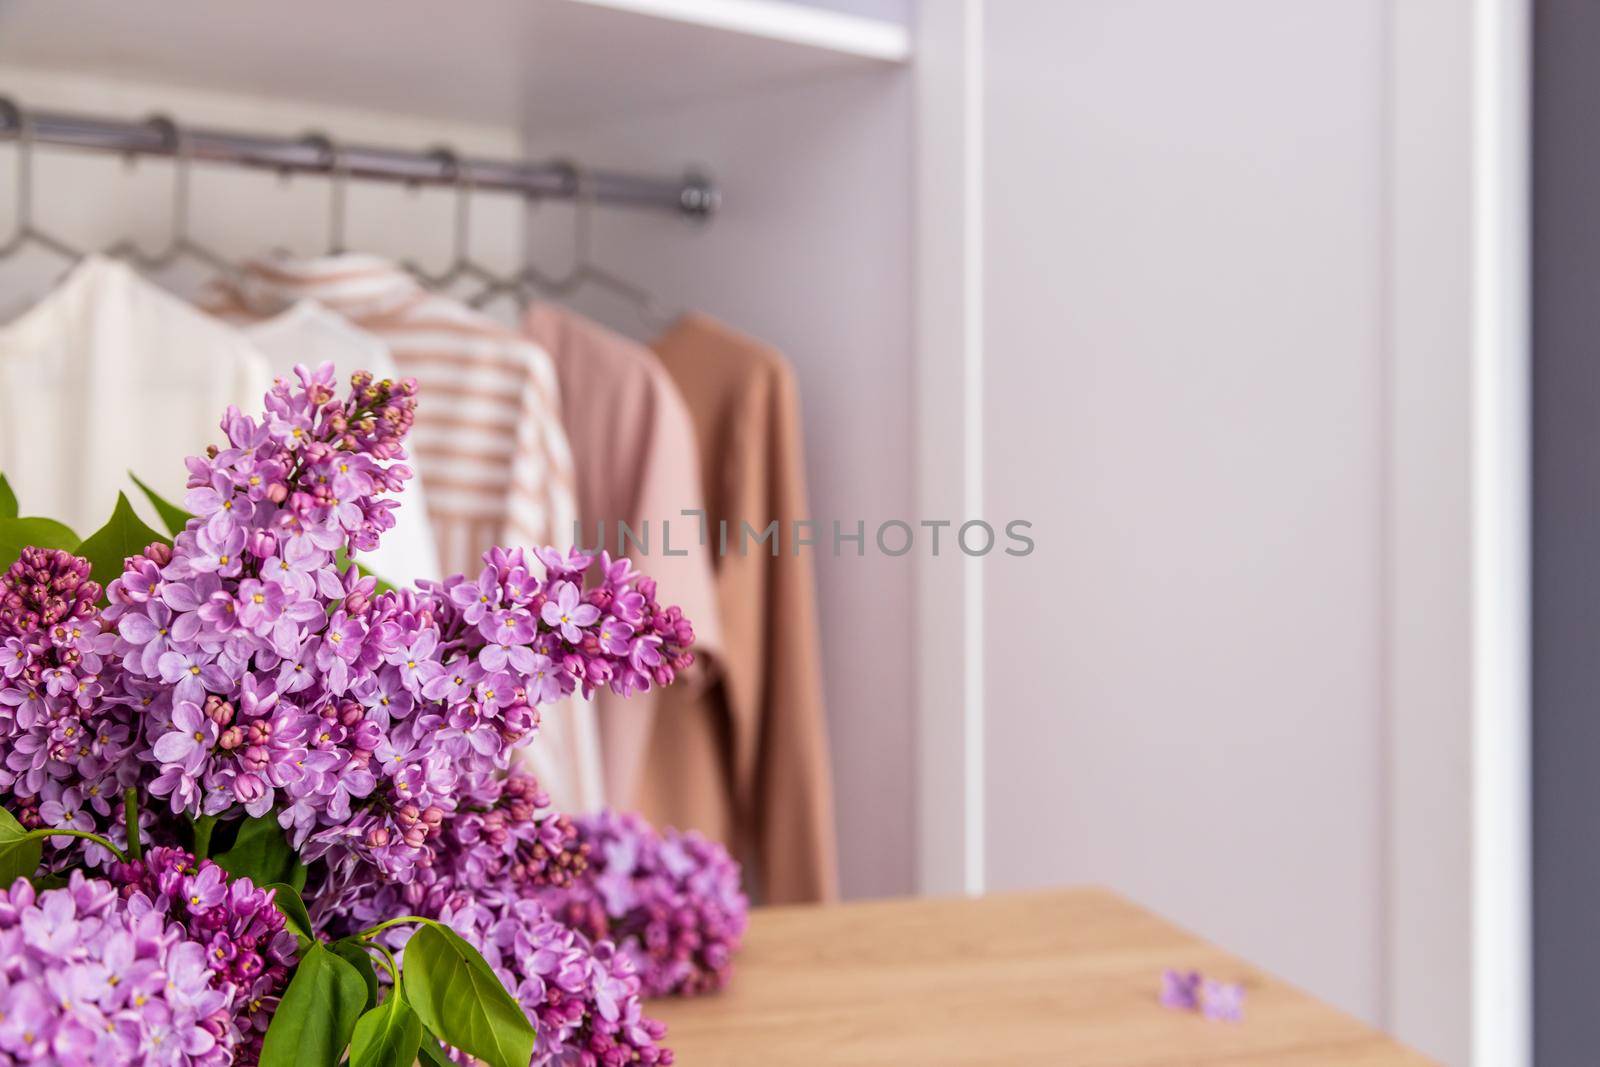 Stylist fashion wardrobe in neutral beige tones. Mockup for washing powder or bleach. Copy and paste space for text or your product. In foreground a wooden table and a branch of lilac, for the product